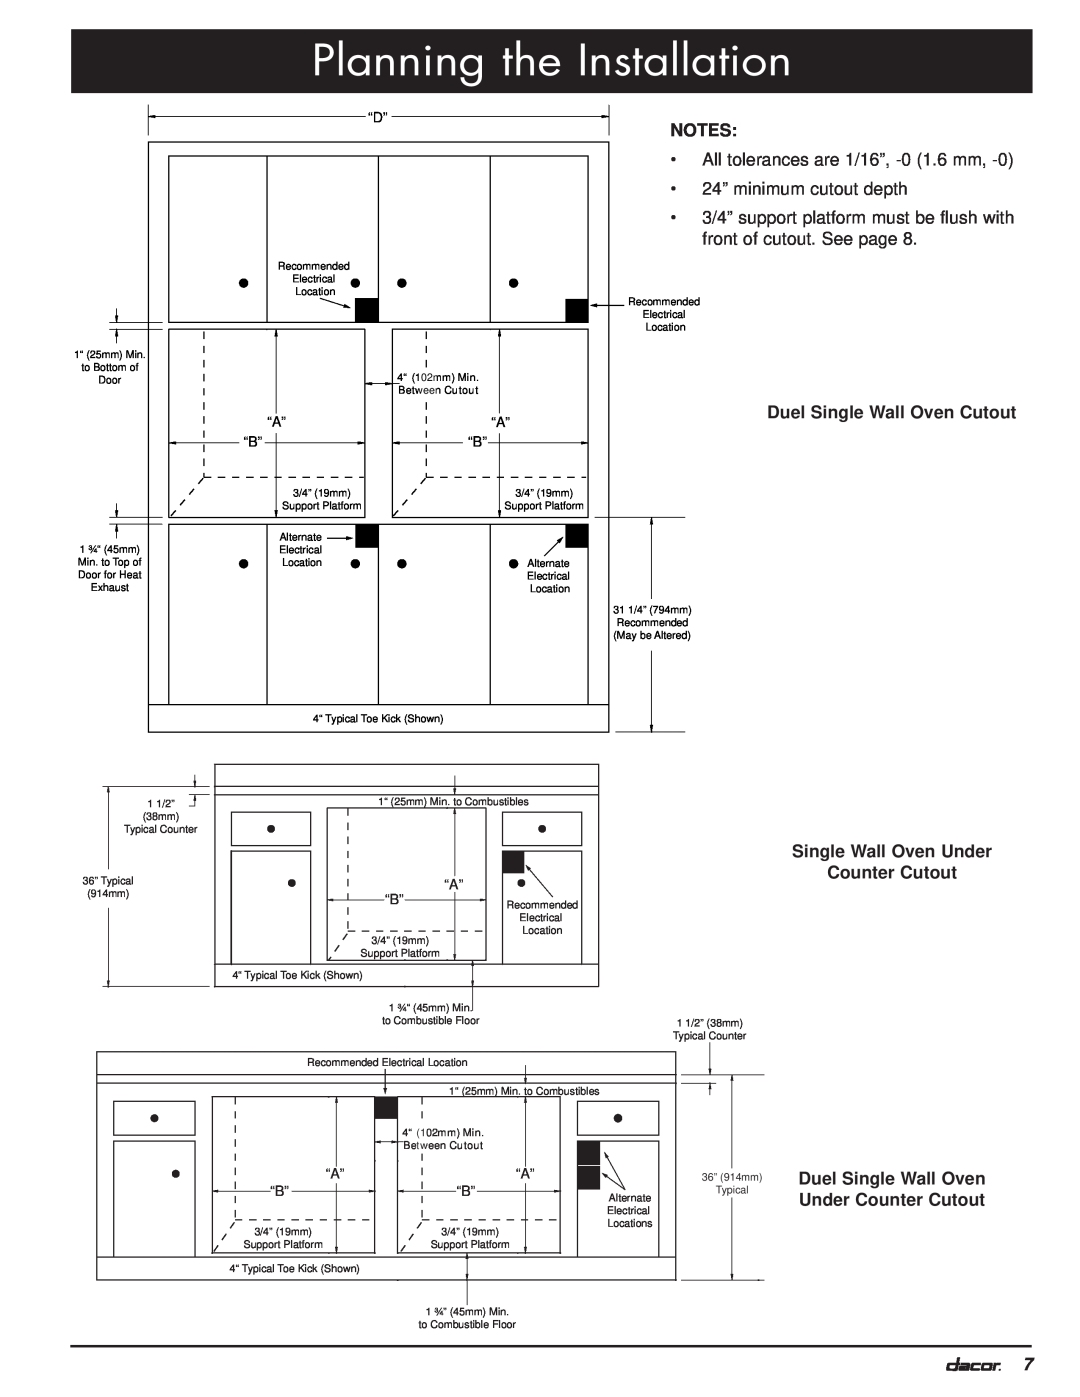 Dacor MO manual Planning the Installation, Duel Single Wall Oven, 4“ 102mm Min, Between Cutout 